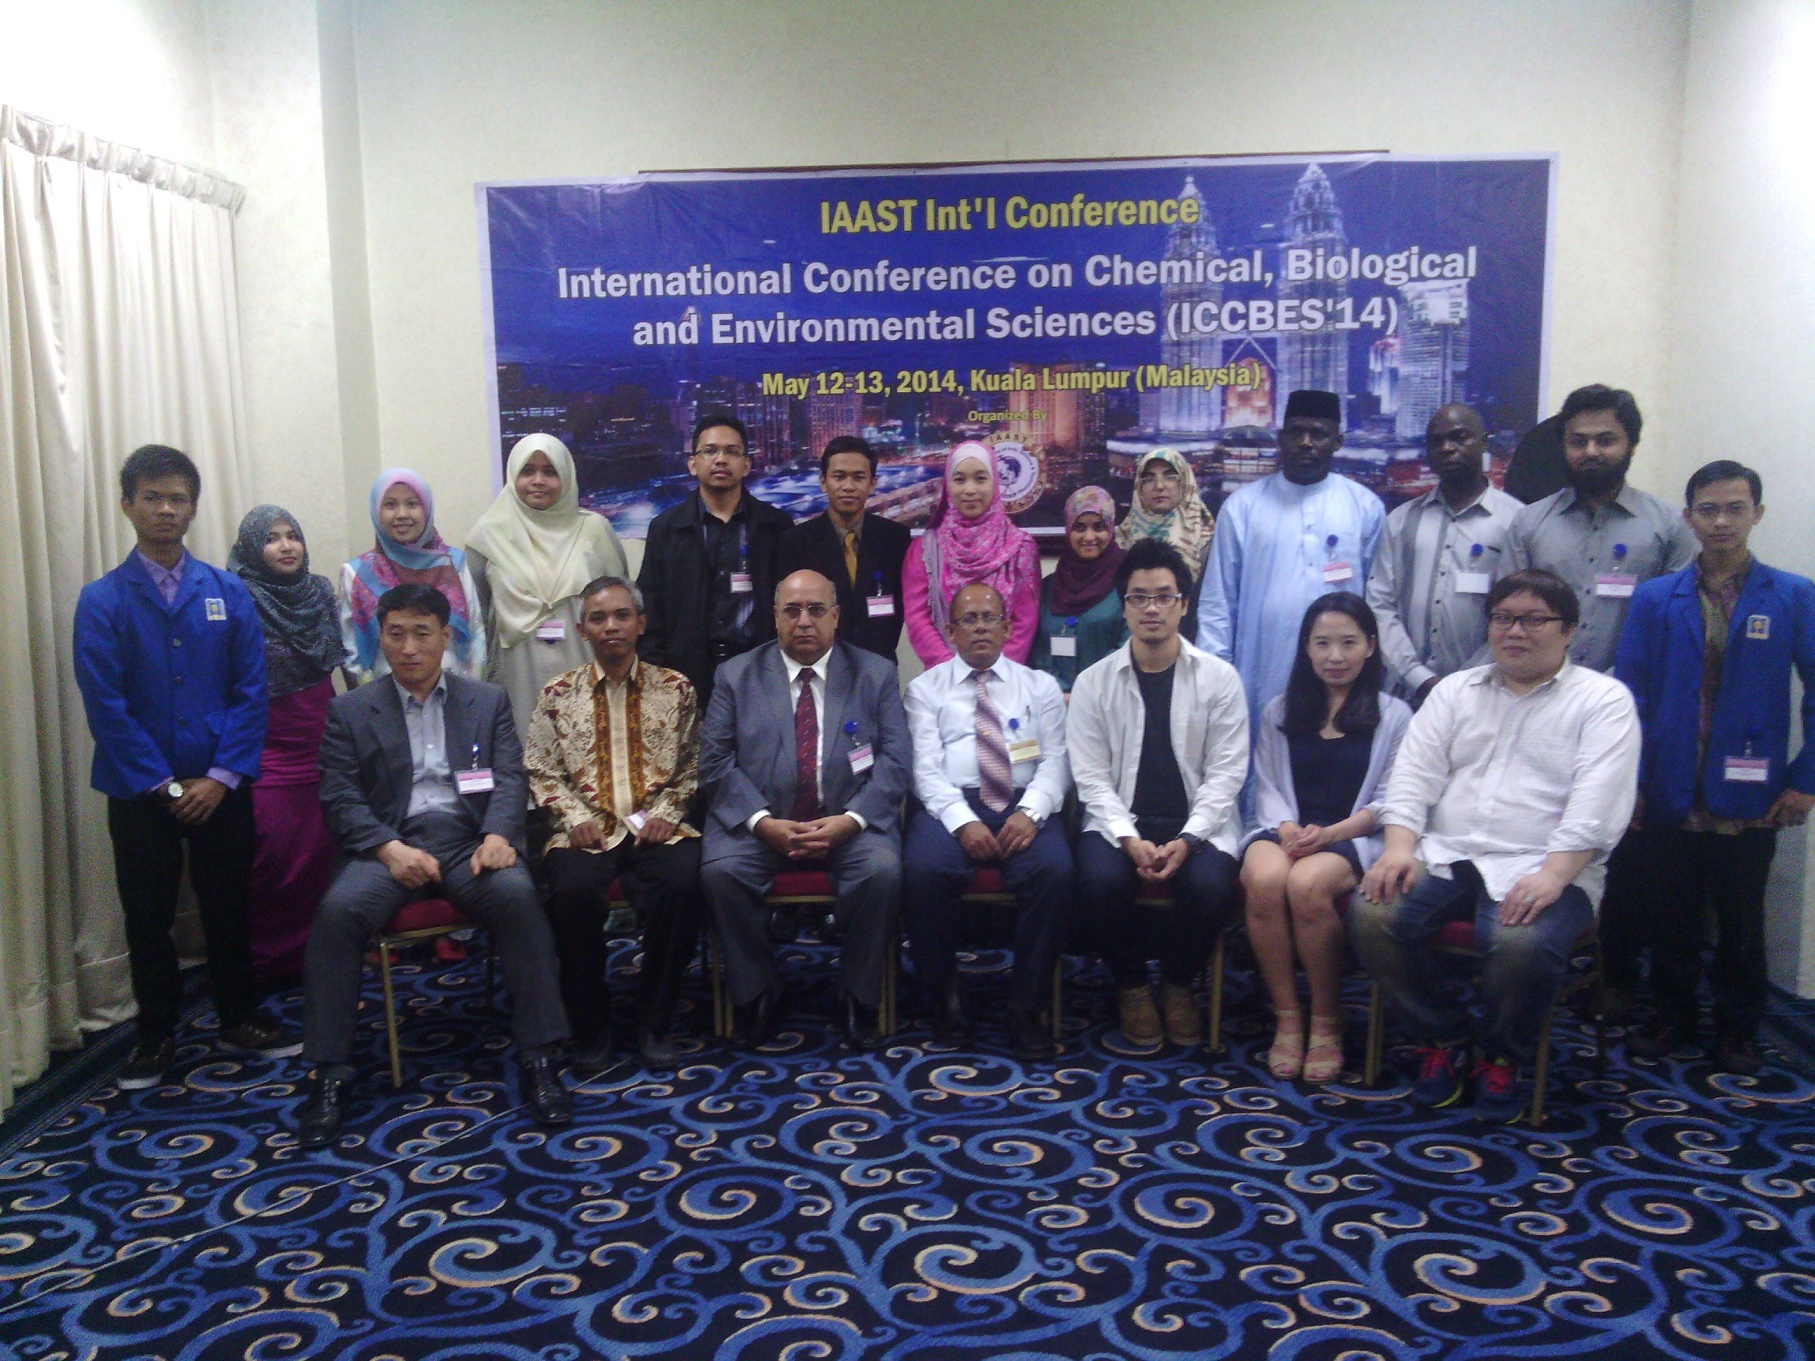 Foto International Conference on Chemical, Biological and Environmental Sciences (ICCBES'14)